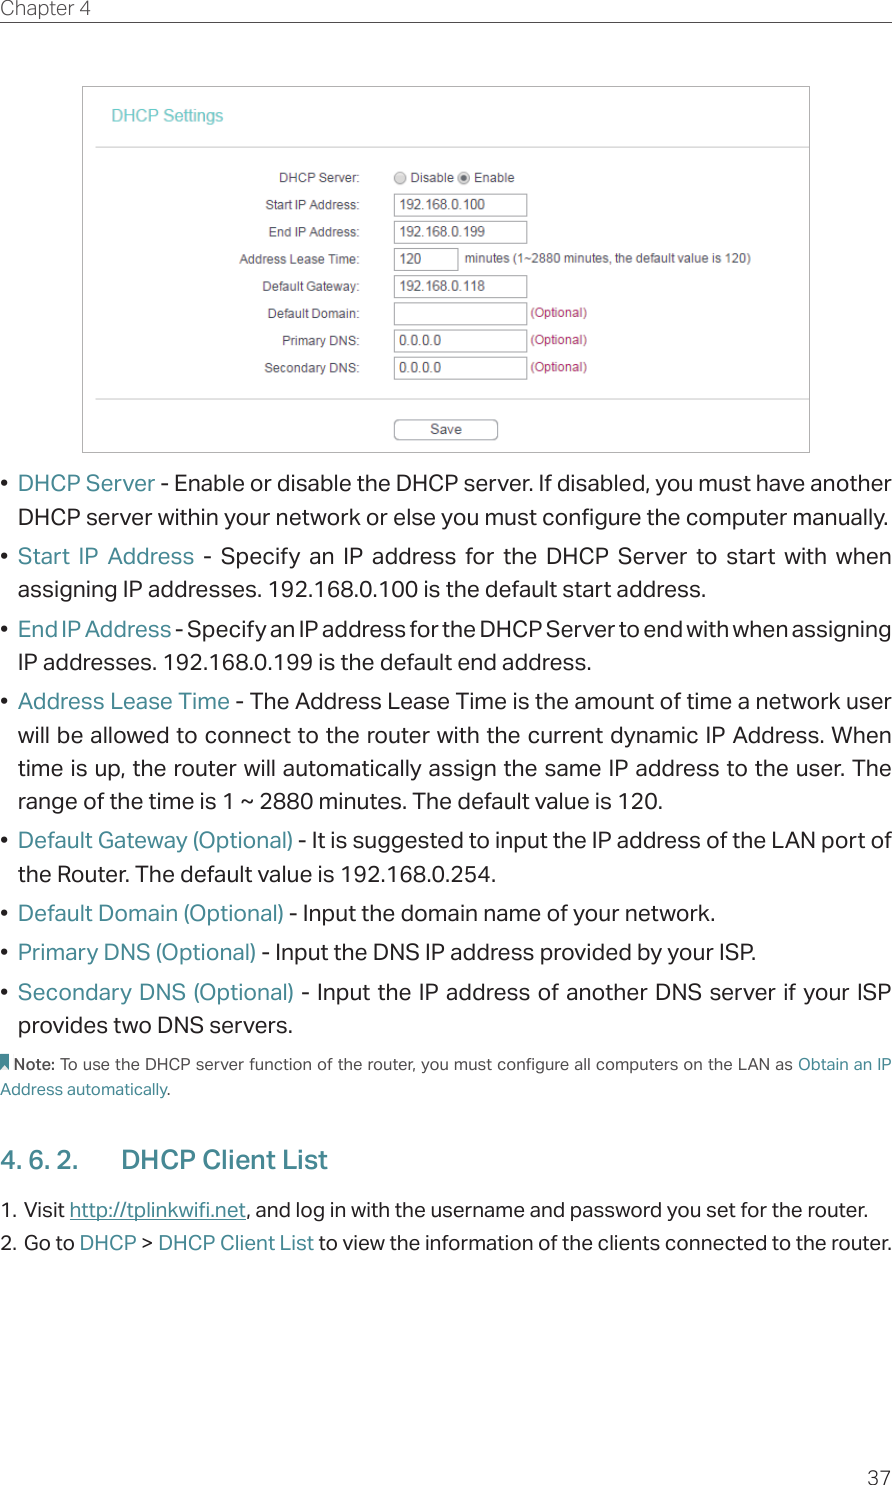 37Chapter 4  •  DHCP Server - Enable or disable the DHCP server. If disabled, you must have another DHCP server within your network or else you must configure the computer manually.•  Start IP Address - Specify an IP address for the DHCP Server to start with when assigning IP addresses. 192.168.0.100 is the default start address.•  End IP Address - Specify an IP address for the DHCP Server to end with when assigning IP addresses. 192.168.0.199 is the default end address.•  Address Lease Time - The Address Lease Time is the amount of time a network user will be allowed to connect to the router with the current dynamic IP Address. When time is up, the router will automatically assign the same IP address to the user. The range of the time is 1 ~ 2880 minutes. The default value is 120.•  Default Gateway (Optional) - It is suggested to input the IP address of the LAN port of the Router. The default value is 192.168.0.254.•  Default Domain (Optional) - Input the domain name of your network.•  Primary DNS (Optional) - Input the DNS IP address provided by your ISP.•  Secondary DNS (Optional) - Input the IP address of another DNS server if your ISP provides two DNS servers.Note: To use the DHCP server function of the router, you must configure all computers on the LAN as Obtain an IP Address automatically.4. 6. 2.  DHCP Client List1. Visit http://tplinkwifi.net, and log in with the username and password you set for the router.2. Go to DHCP &gt; DHCP Client List to view the information of the clients connected to the router.